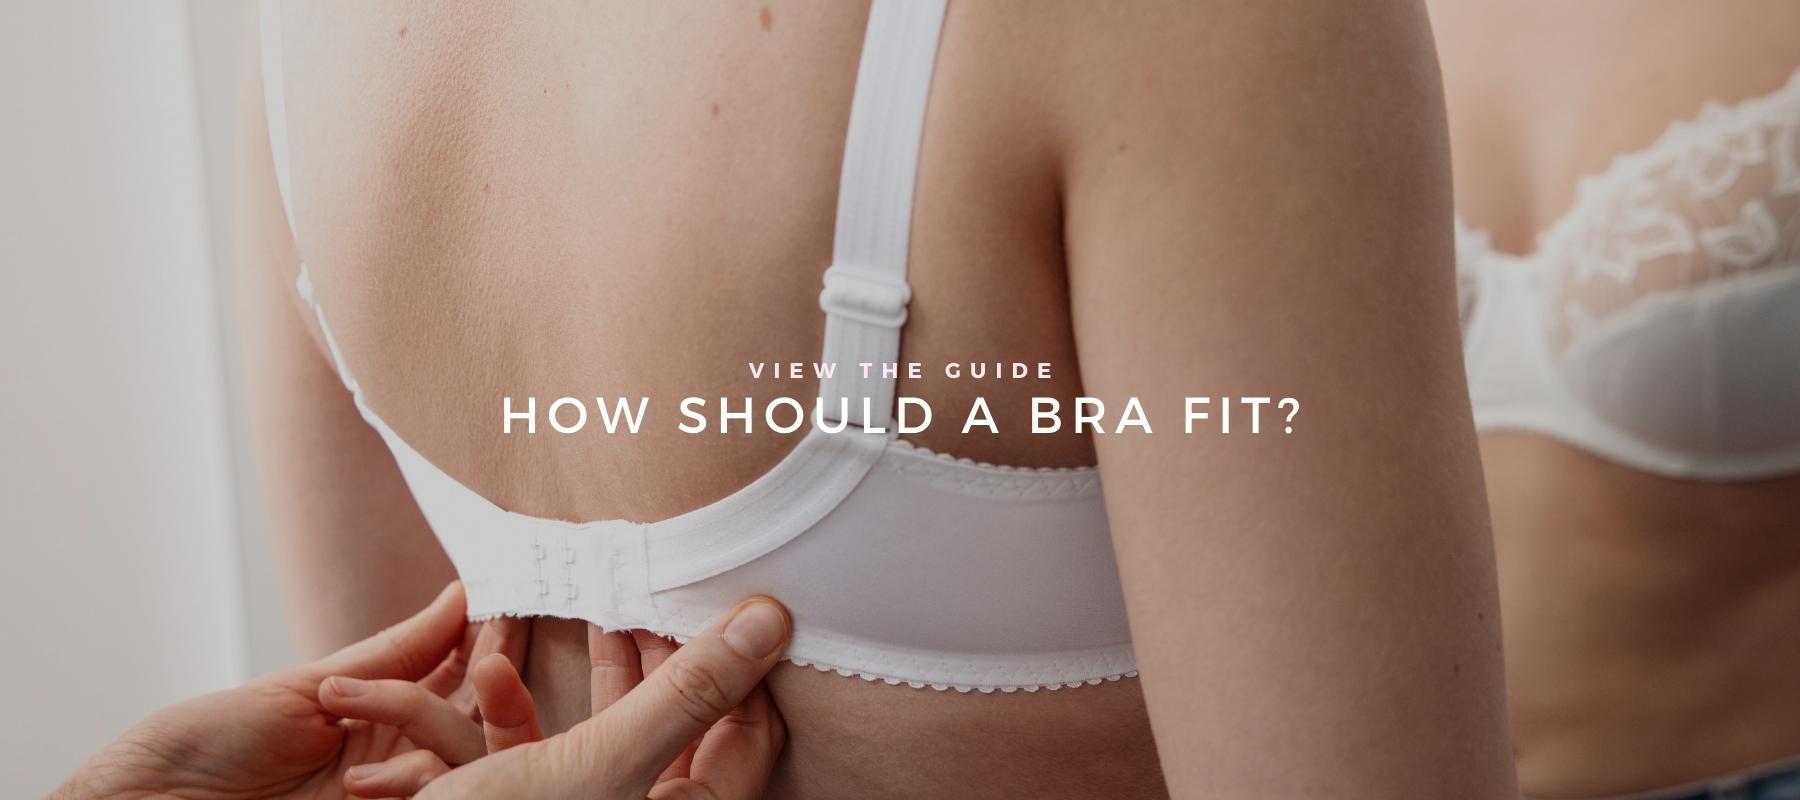 how should a bra fit?